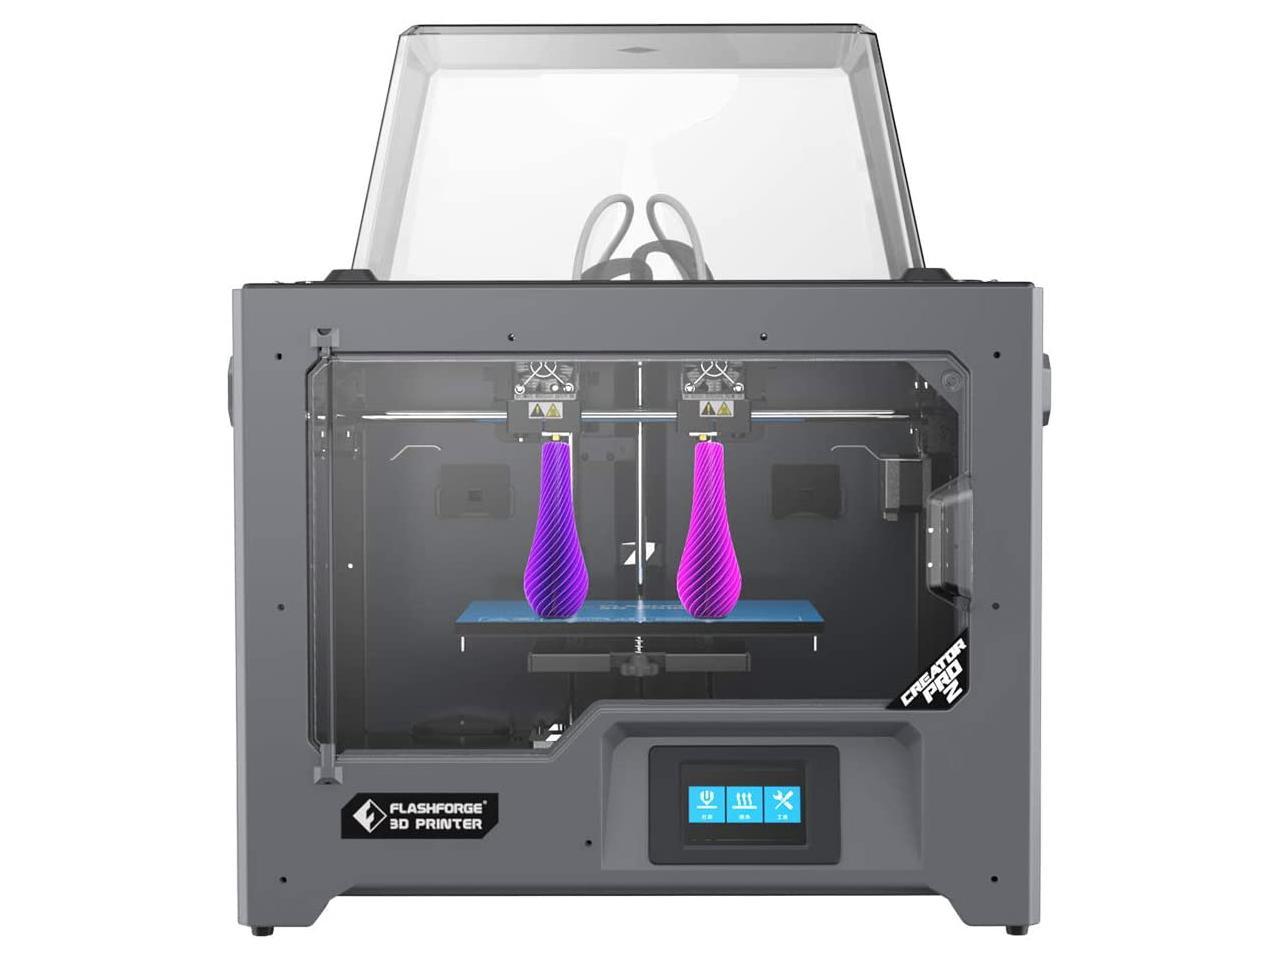 FlashForge 3D Printer Creator Pro2, Independent Dual Extruder W/2 Spools, Metal Frame Structure, Acrylic Covers, Optimized Build Platform, Works with ABS and PLA